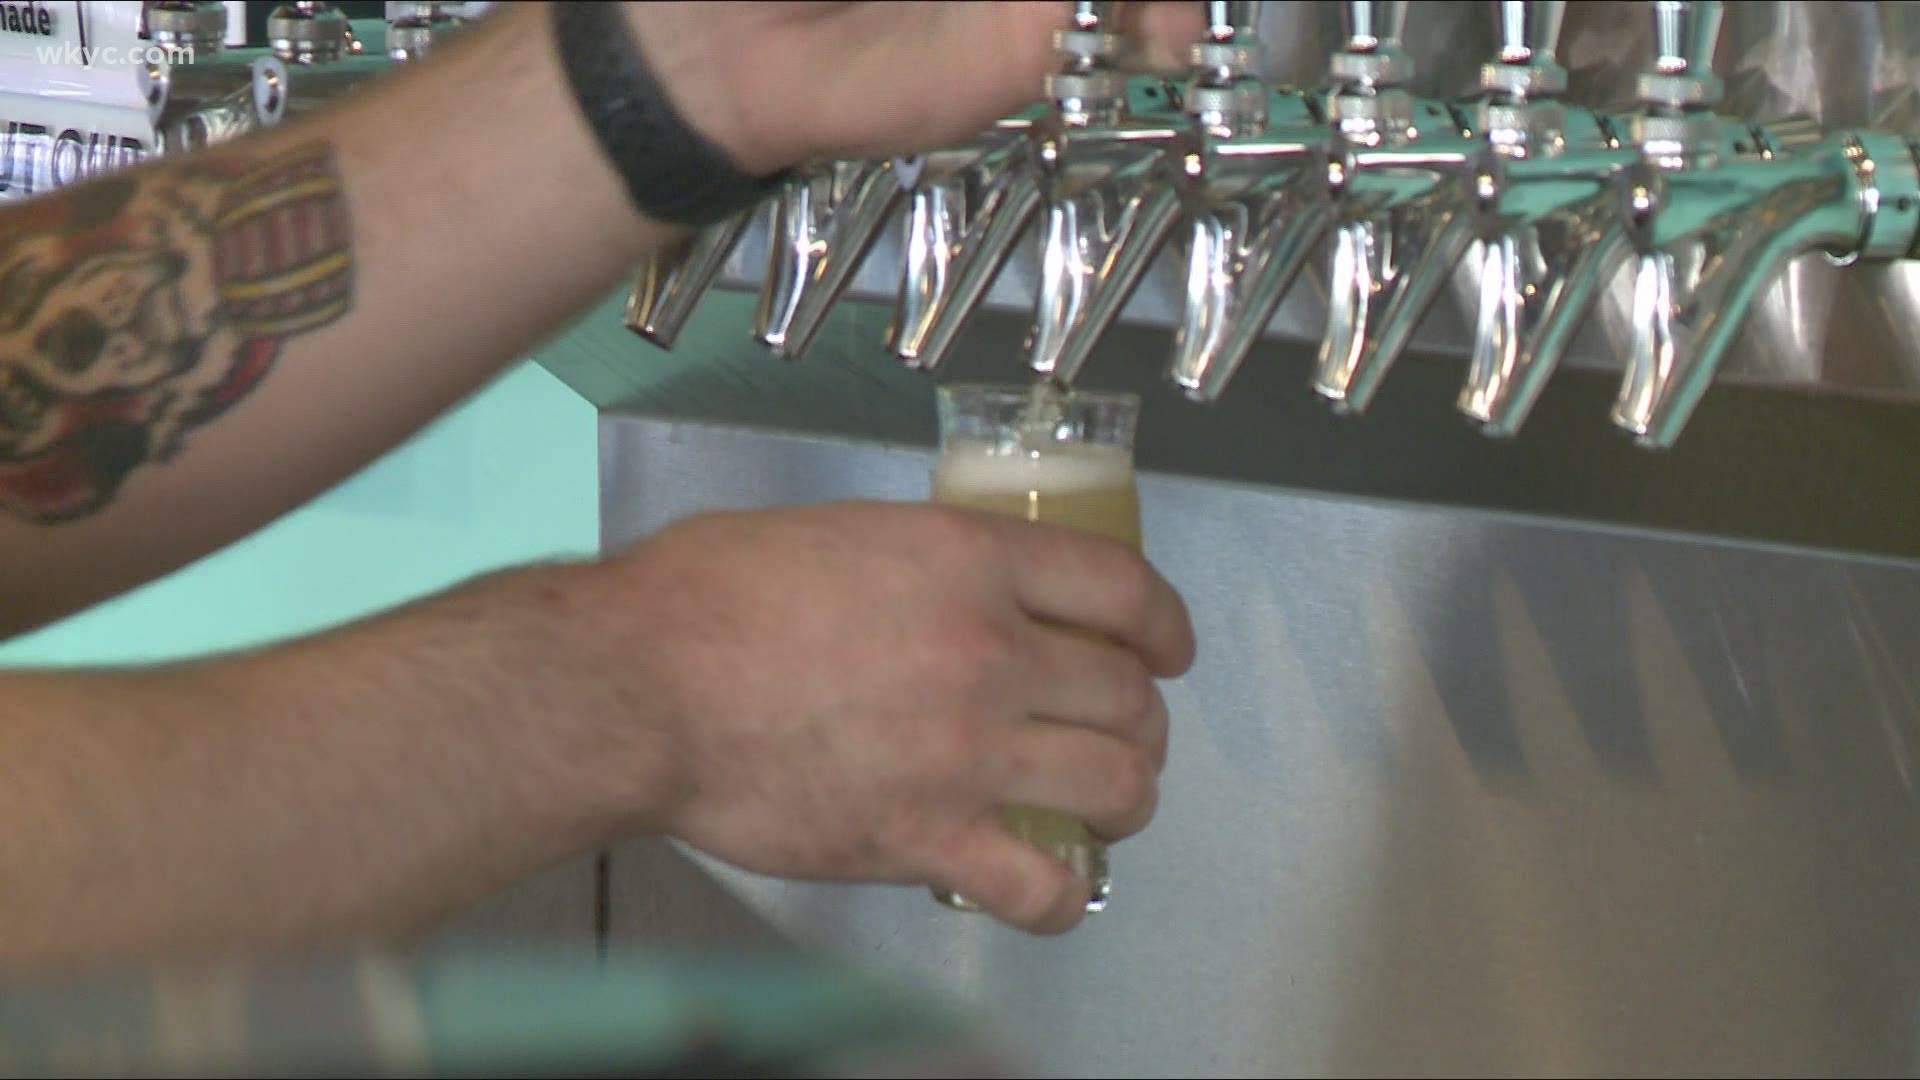 The Summit Brew Path is the best way to try out local breweries from across Northeast Ohio. Head over to wkyc.com for more details.